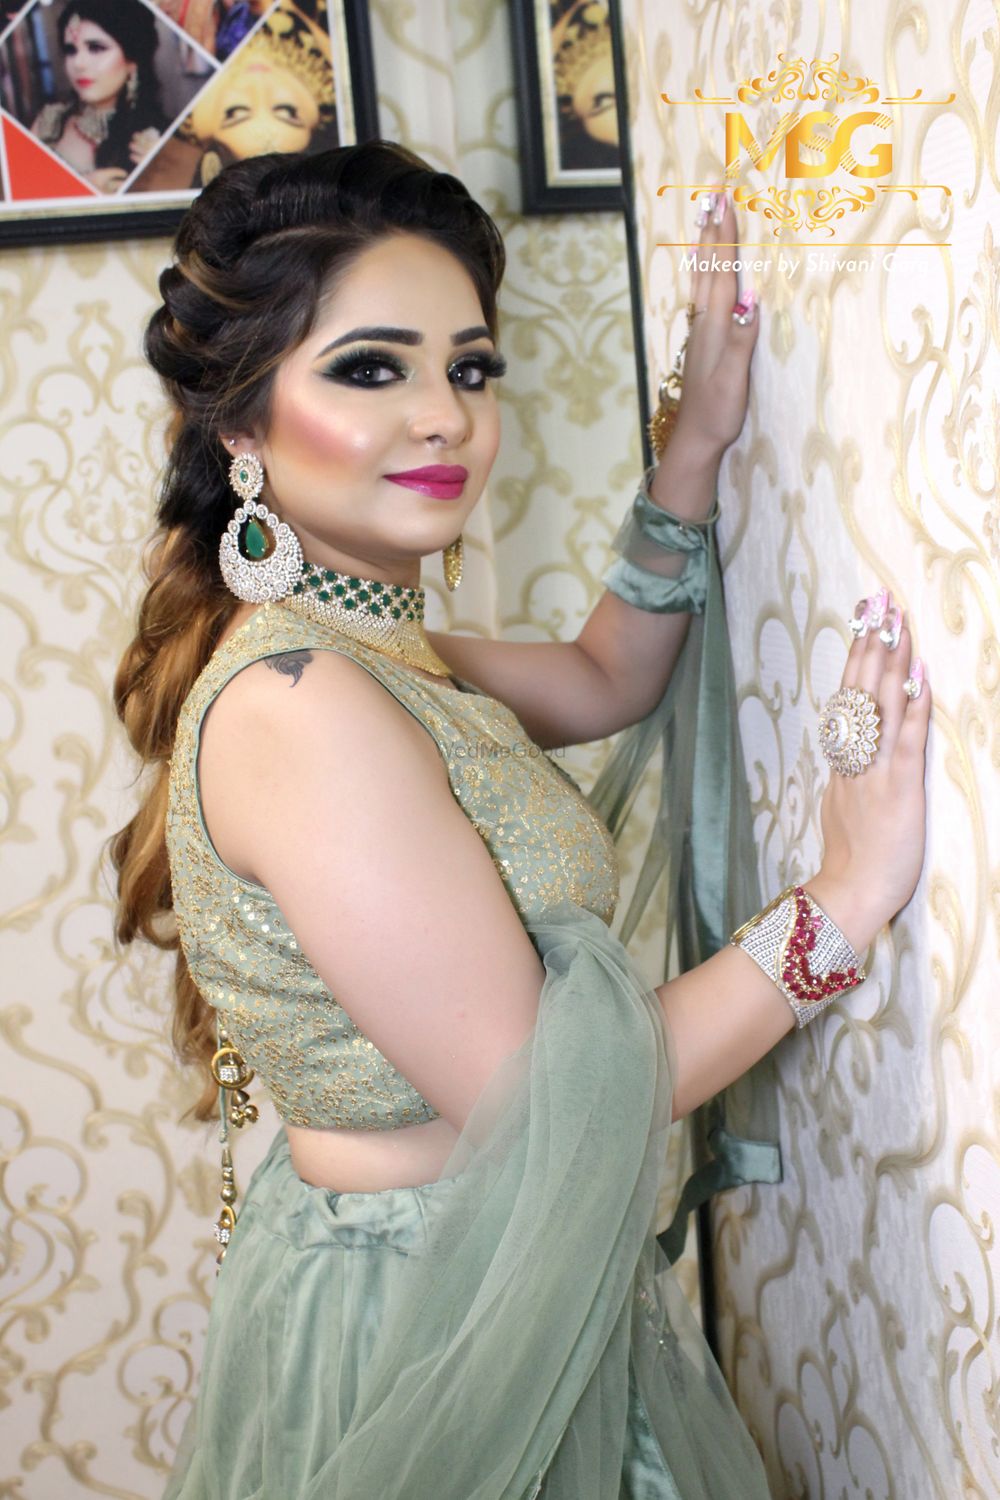 Photo From Engagement Look - By Makeover by Shivani Garg